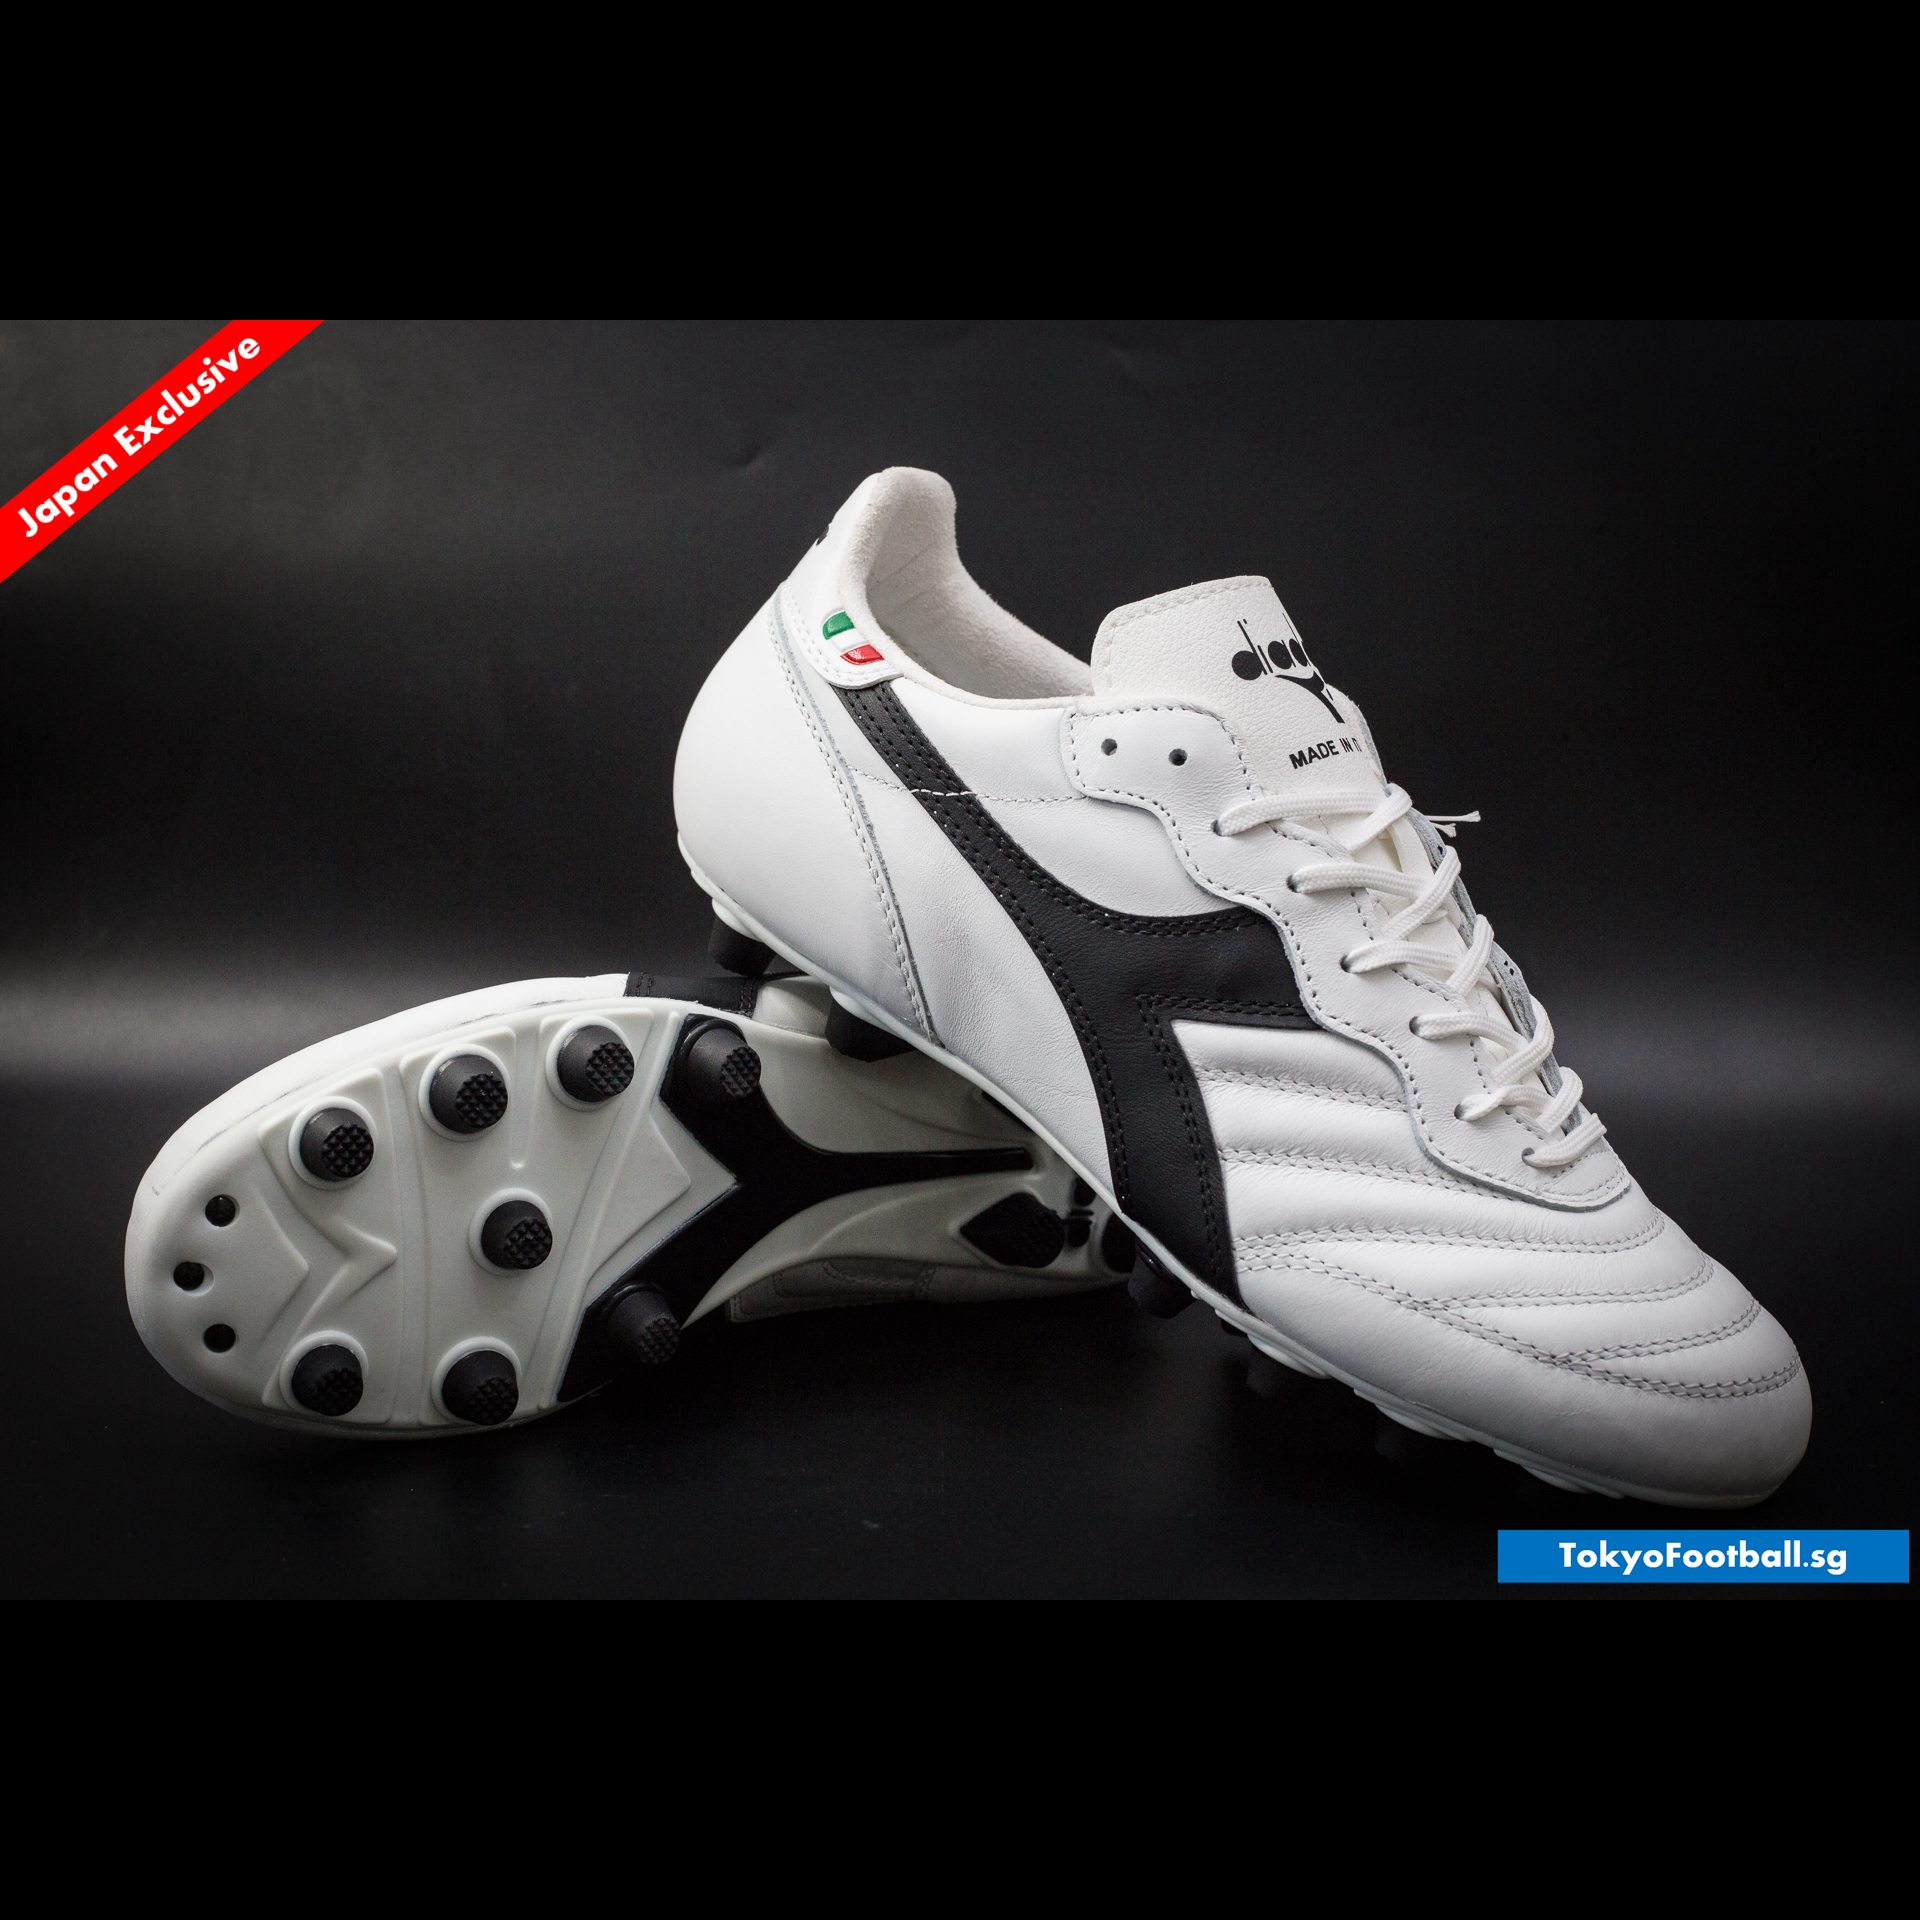 rugby tokyo football boots shoes 